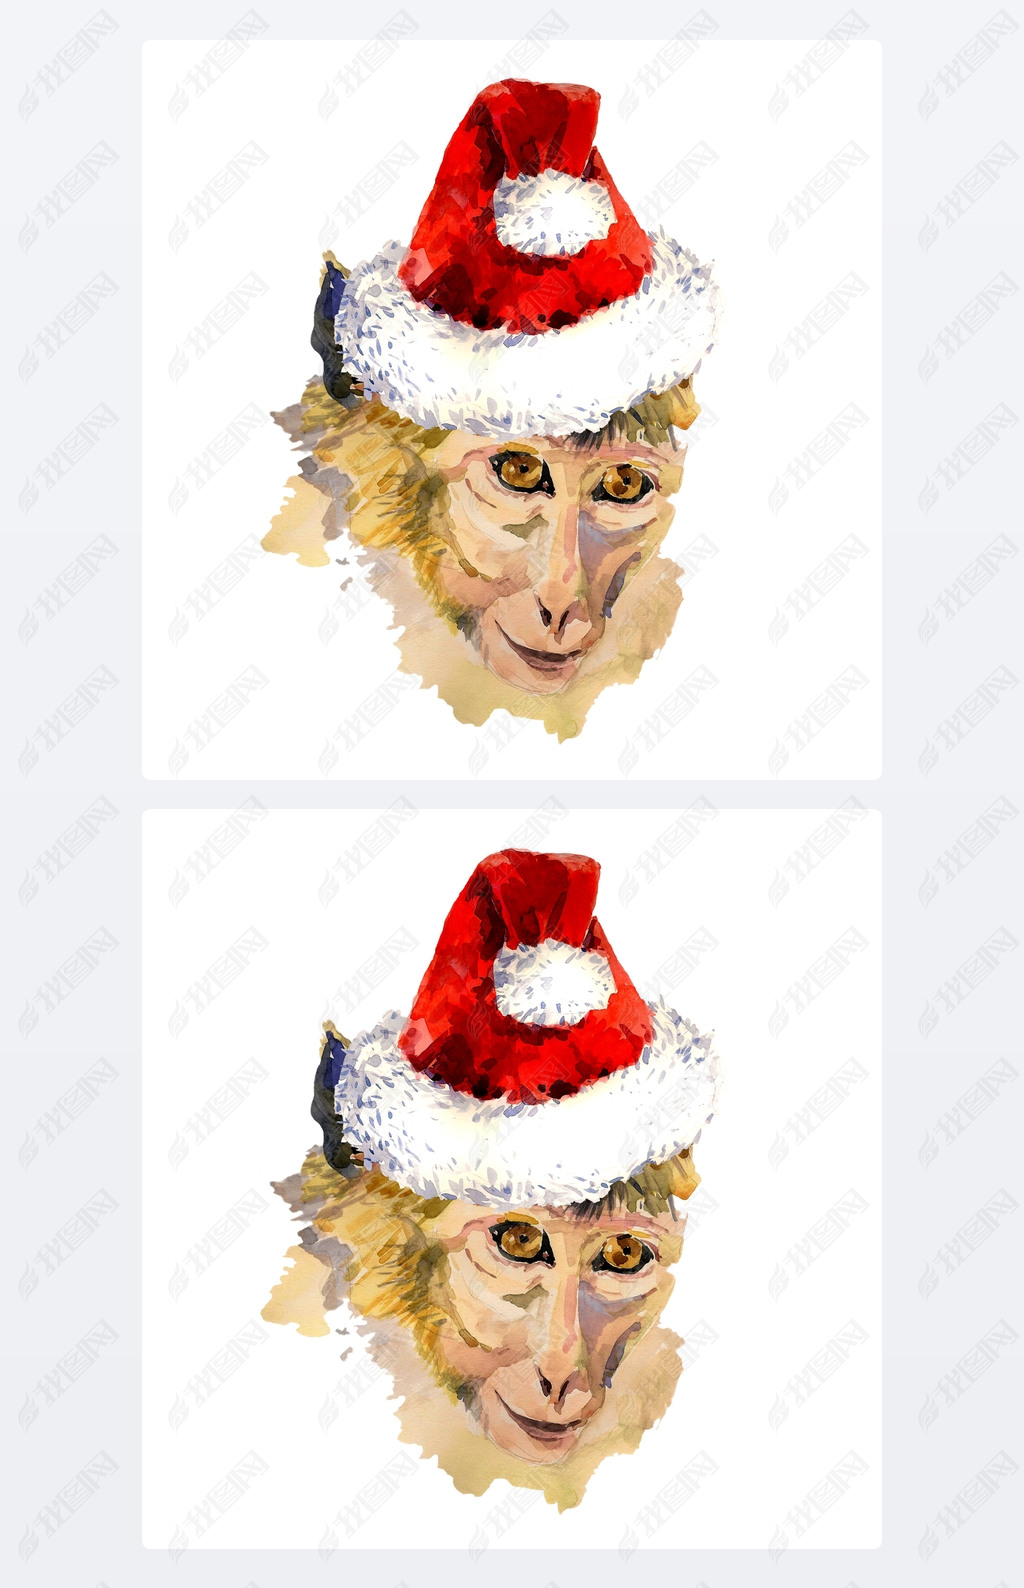 Monkey king portrait in a cool Christmas hat